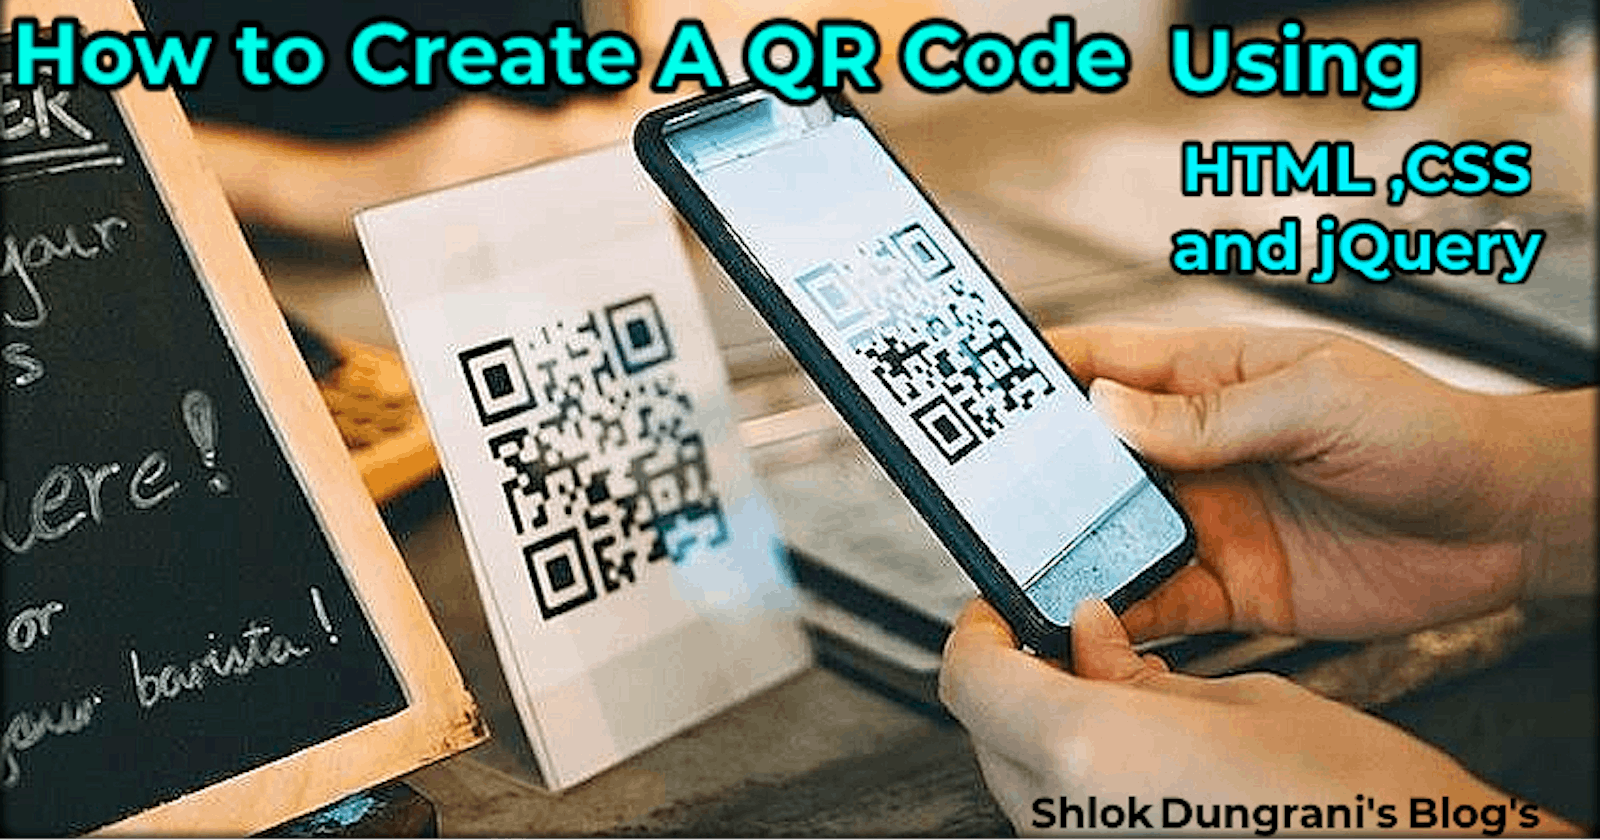 How to create a QR code using HTML, CSS and jQuery